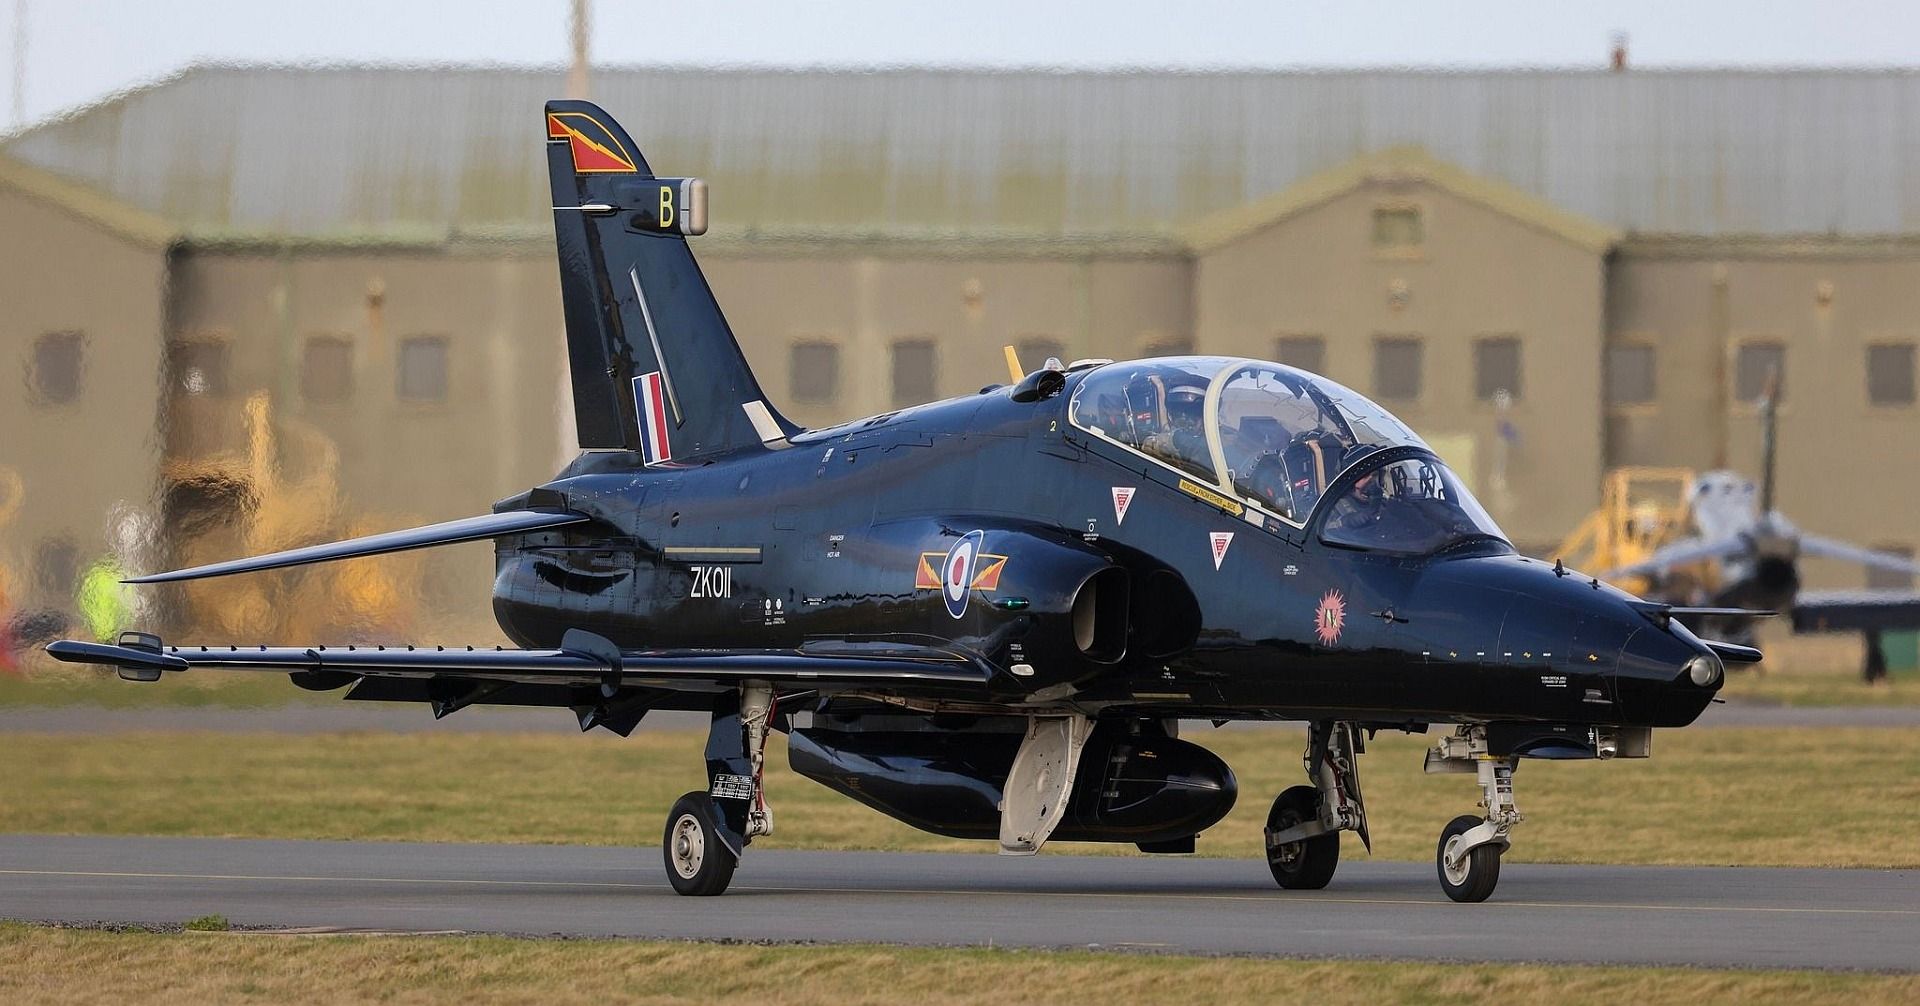 Hawk T2 Jet Trainers To Service Following A Short Precautionary Grounding Due To Engine Issues